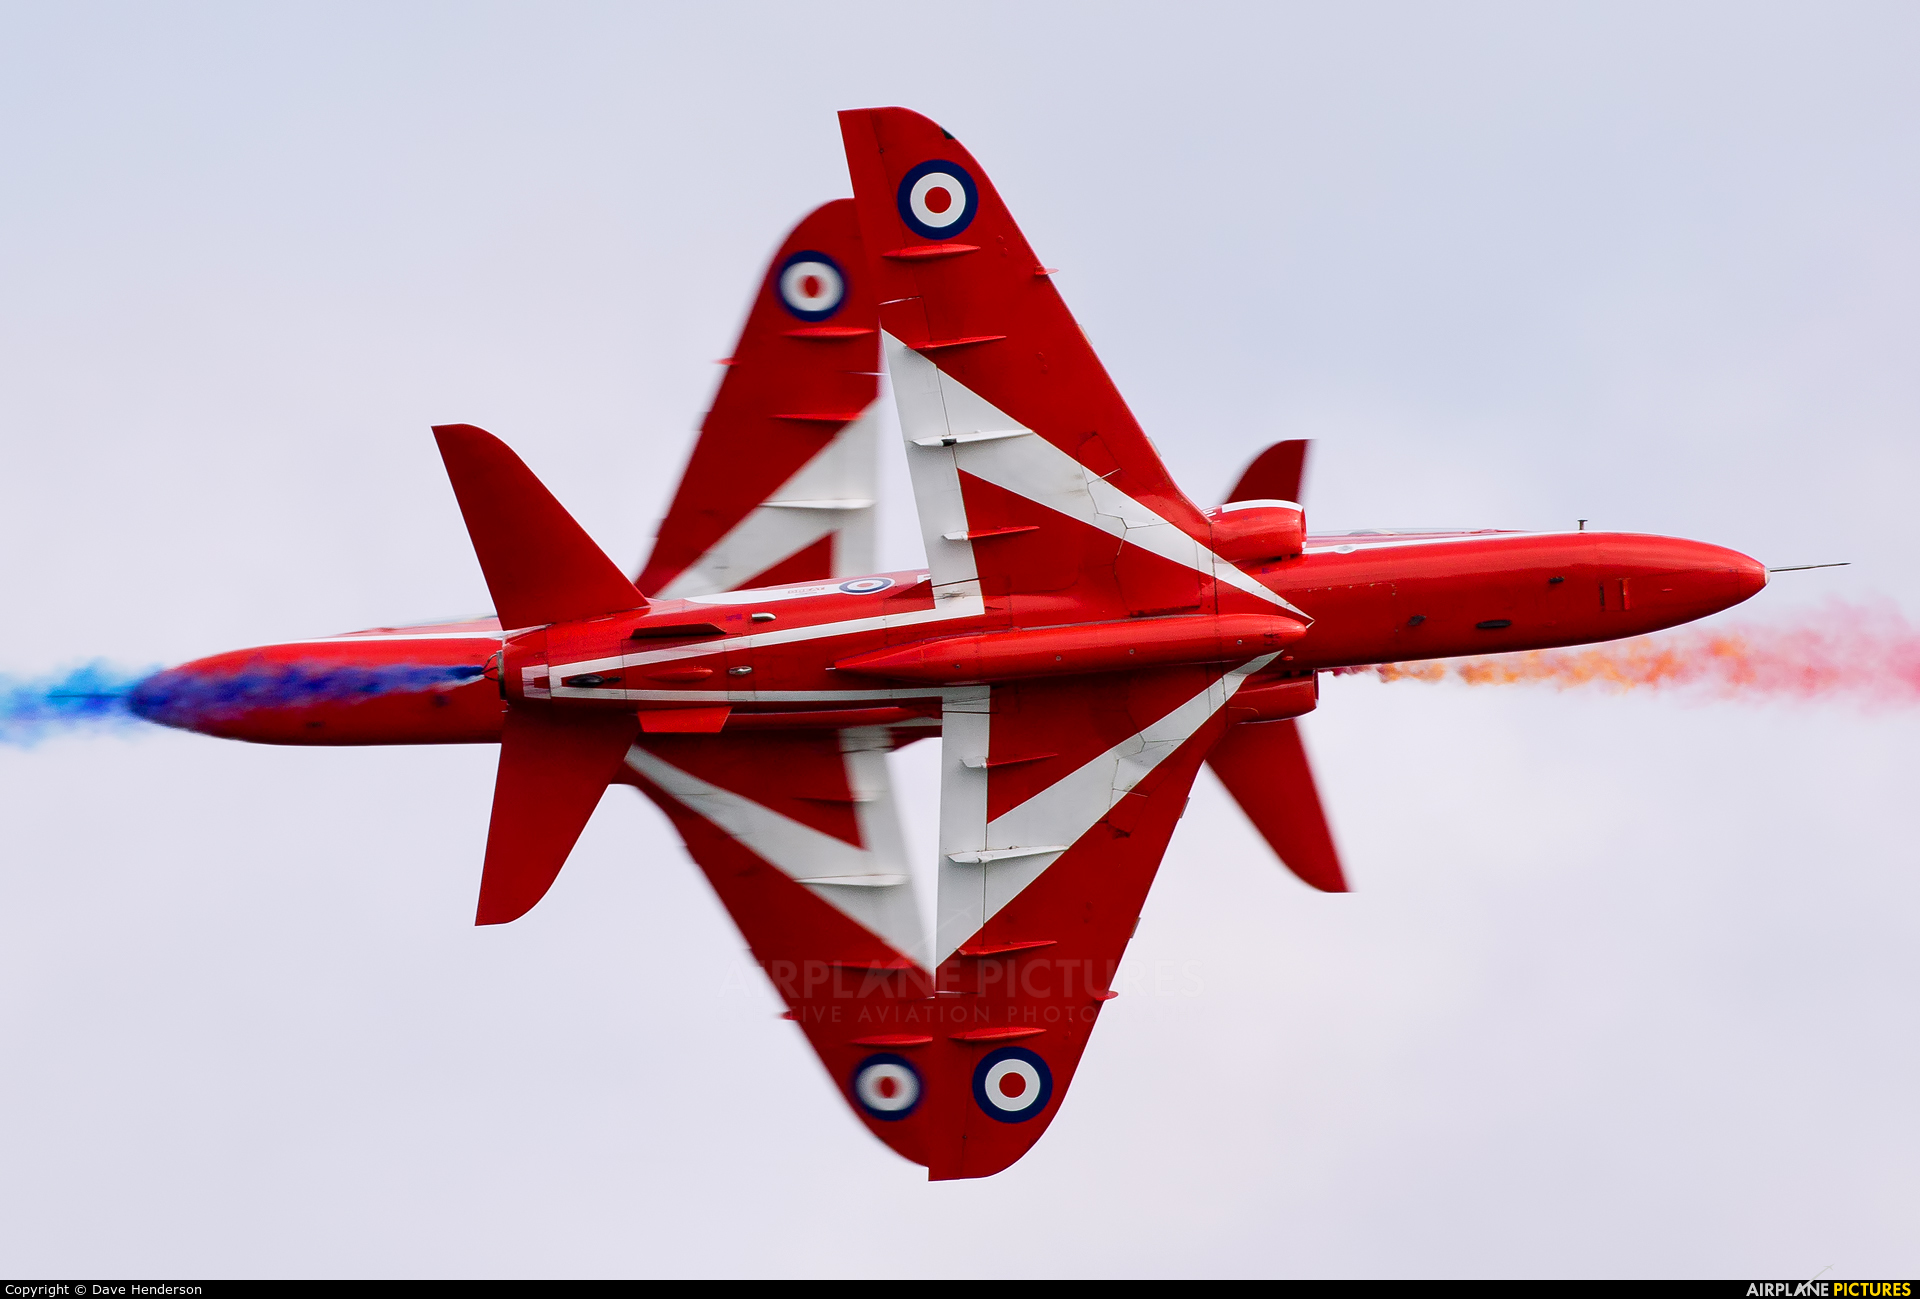 Royal Air Force "Red Arrows" XX311 aircraft at Portrush - Off Airport